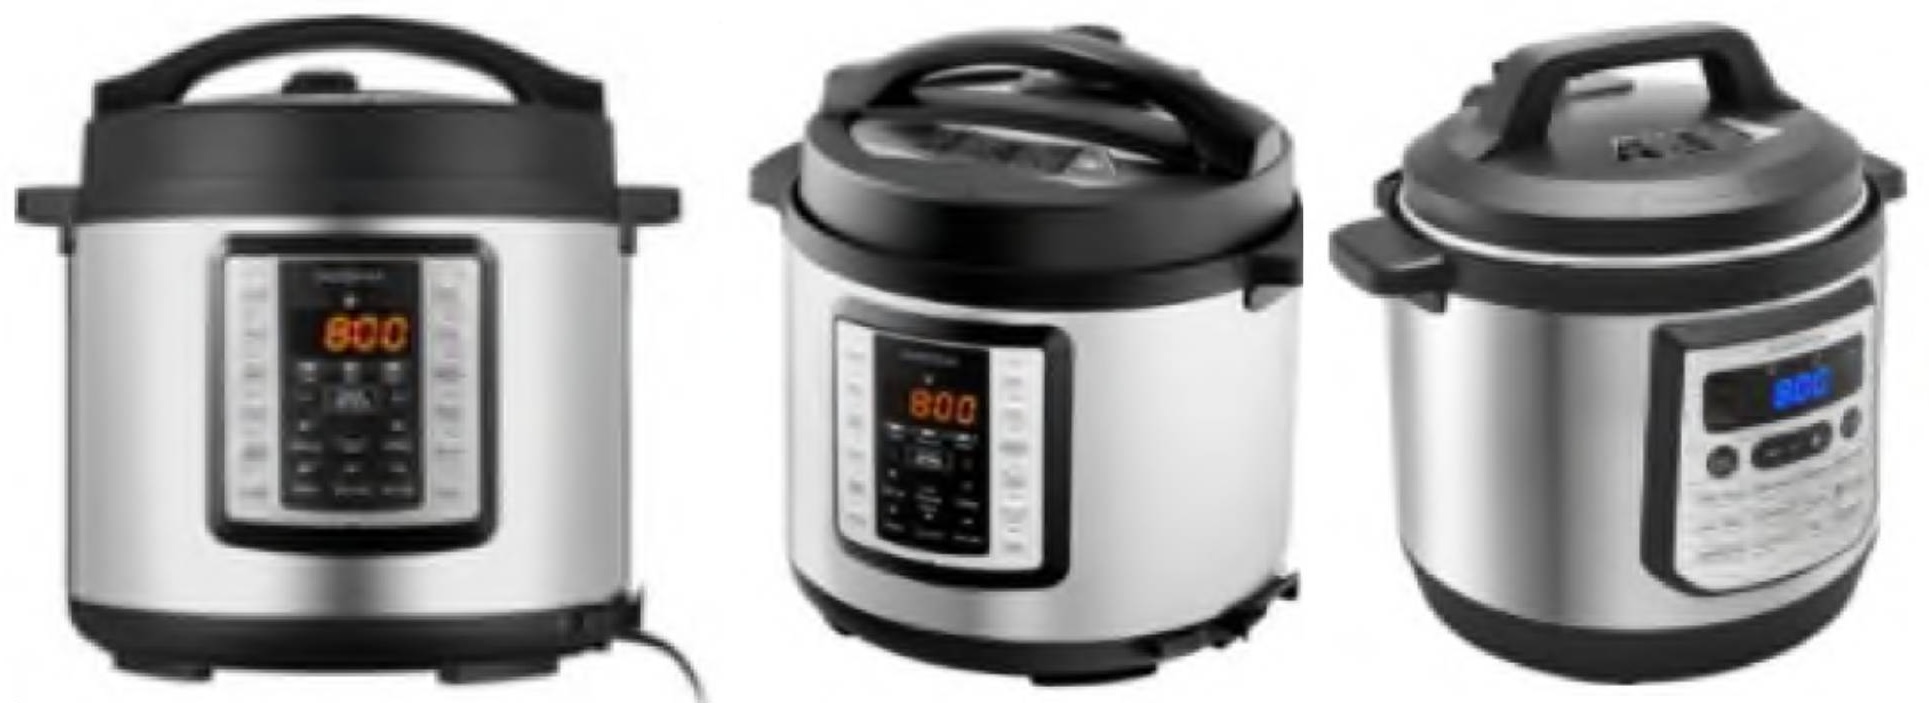 Best Buy Recalls Nearly 1 Million Pressure Cookers Due to Burn Risk